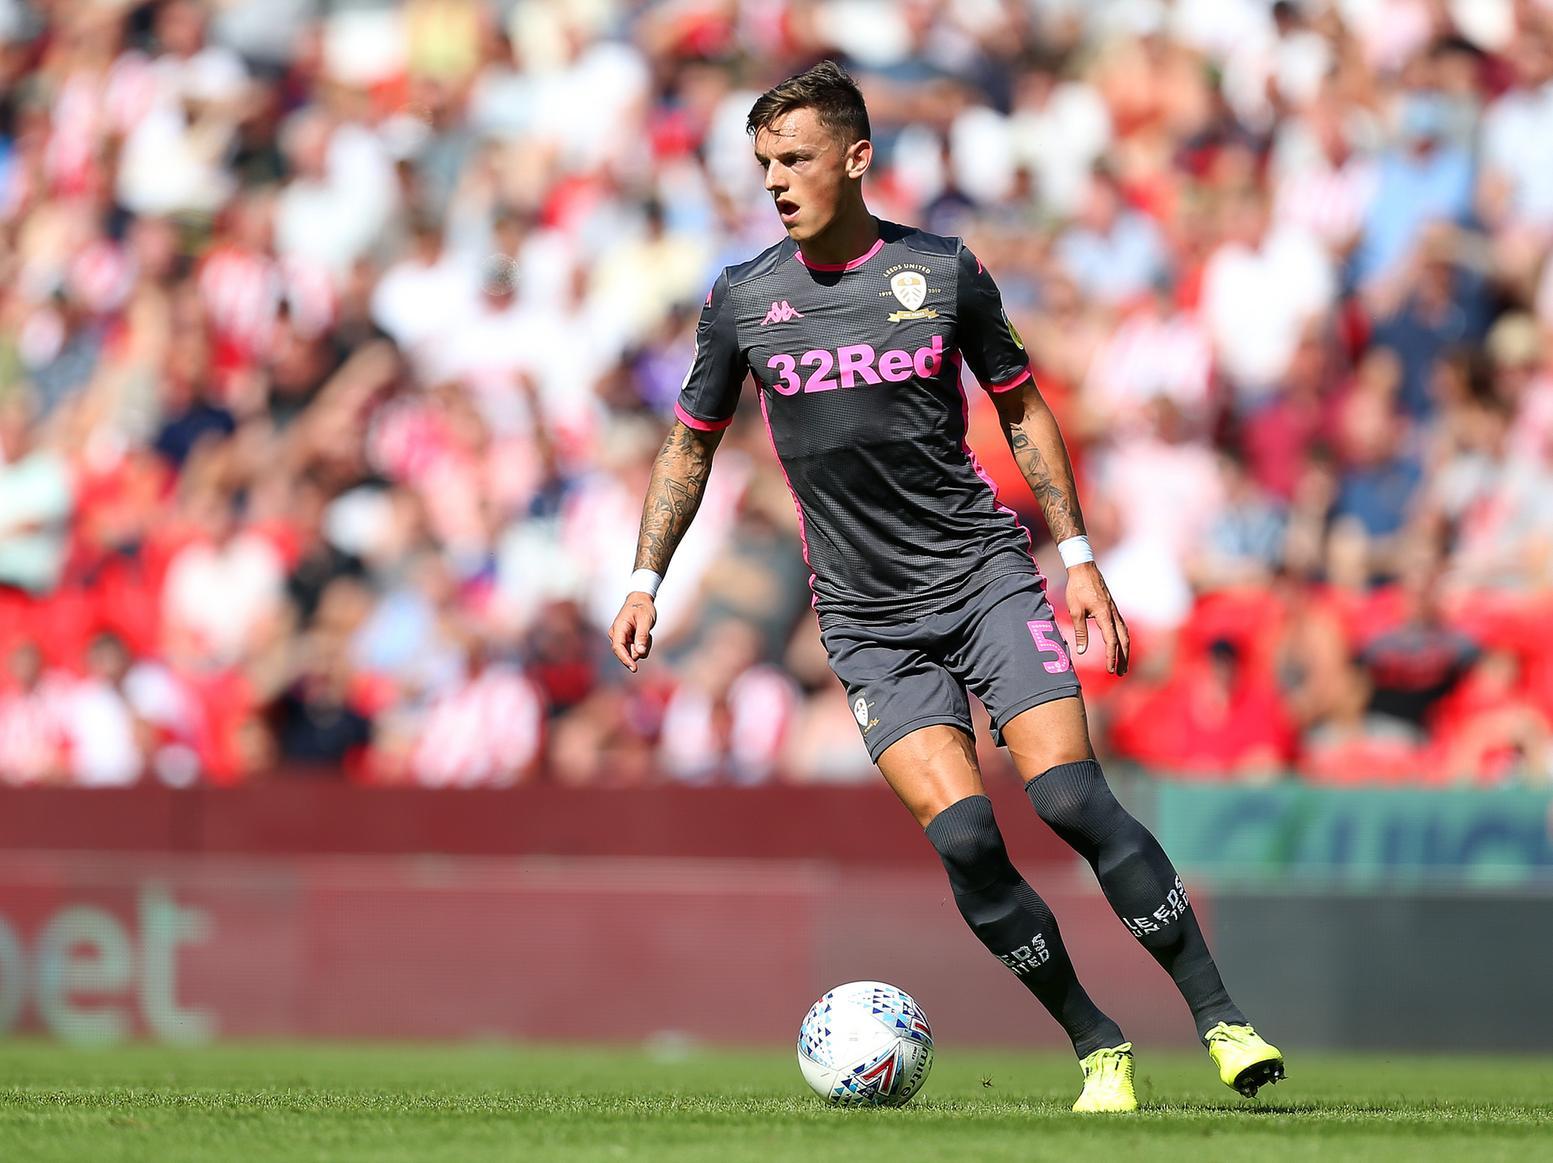 With Kalvin Phillips suspended, Ben White is expected to move forward into a defensive midfield role. It'll be a good test for the Brighton loanee.